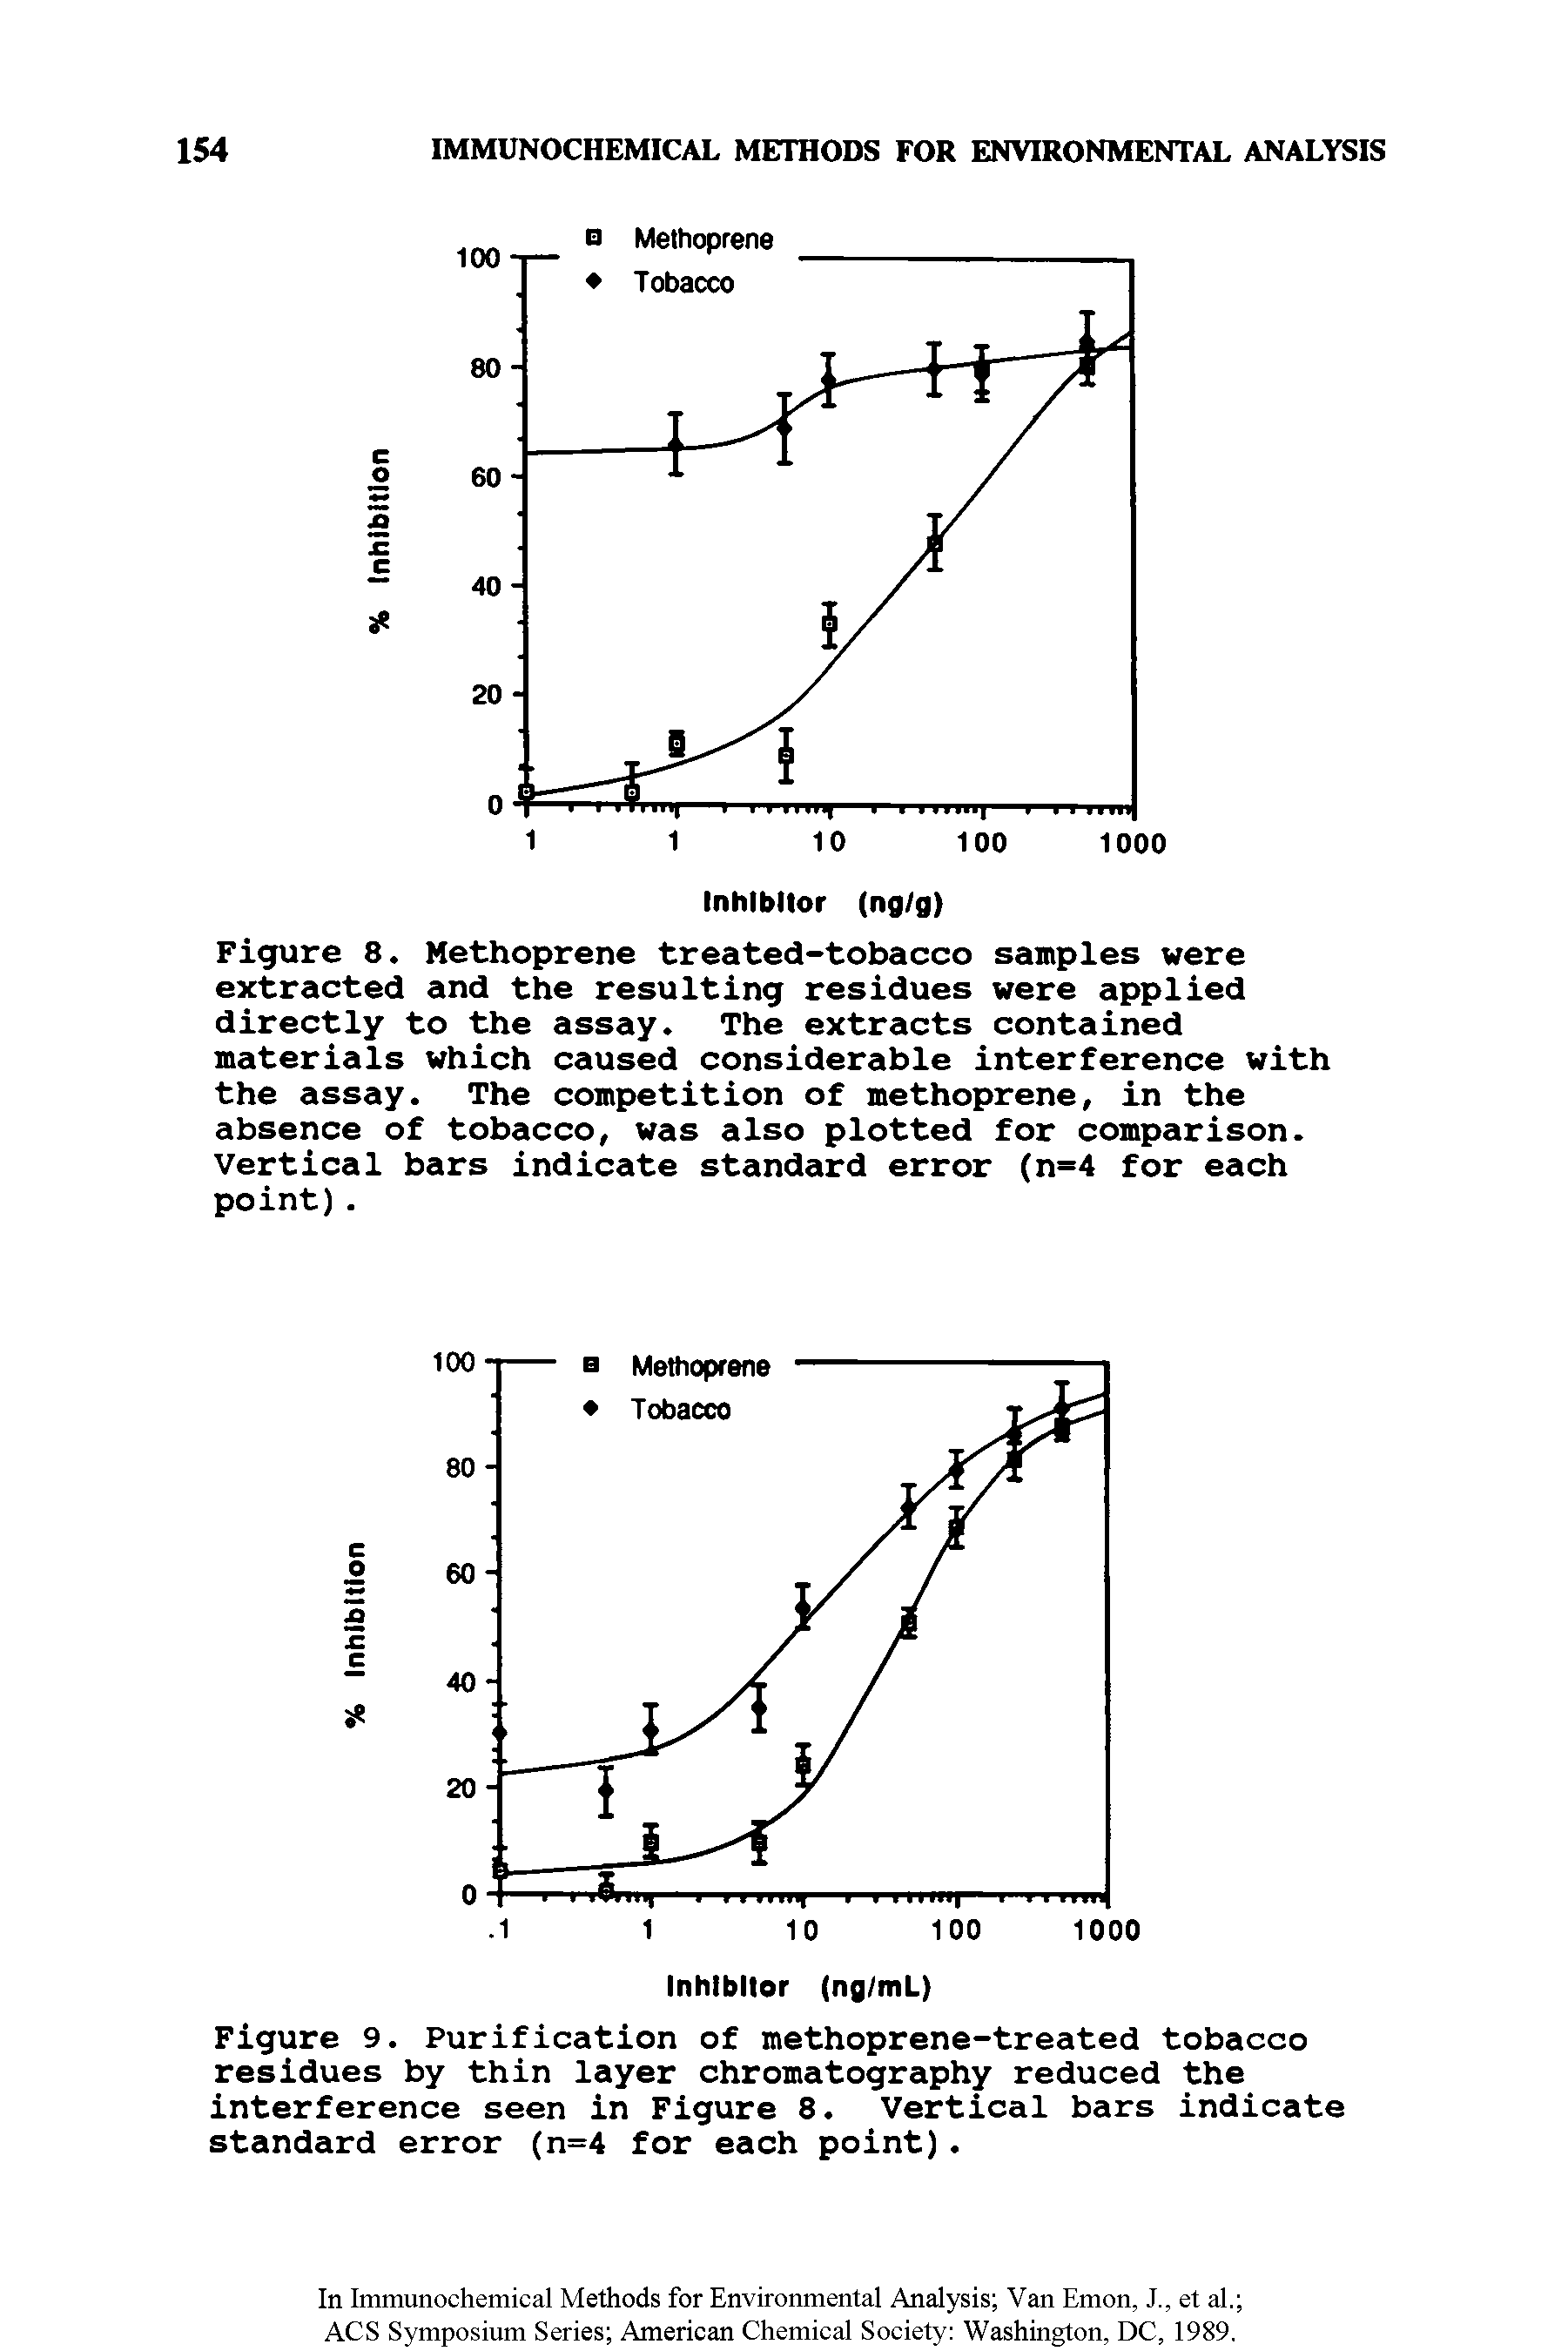 Figure 8. Methoprene treated-tobacco samples were extracted and the resulting residues were applied directly to the assay. The extracts contained materials which caused considerable interference with the assay. The competition of methoprene, in the absence of tobacco, was also plotted for comparison. Vertical bars indicate standard error (n=4 for each point).